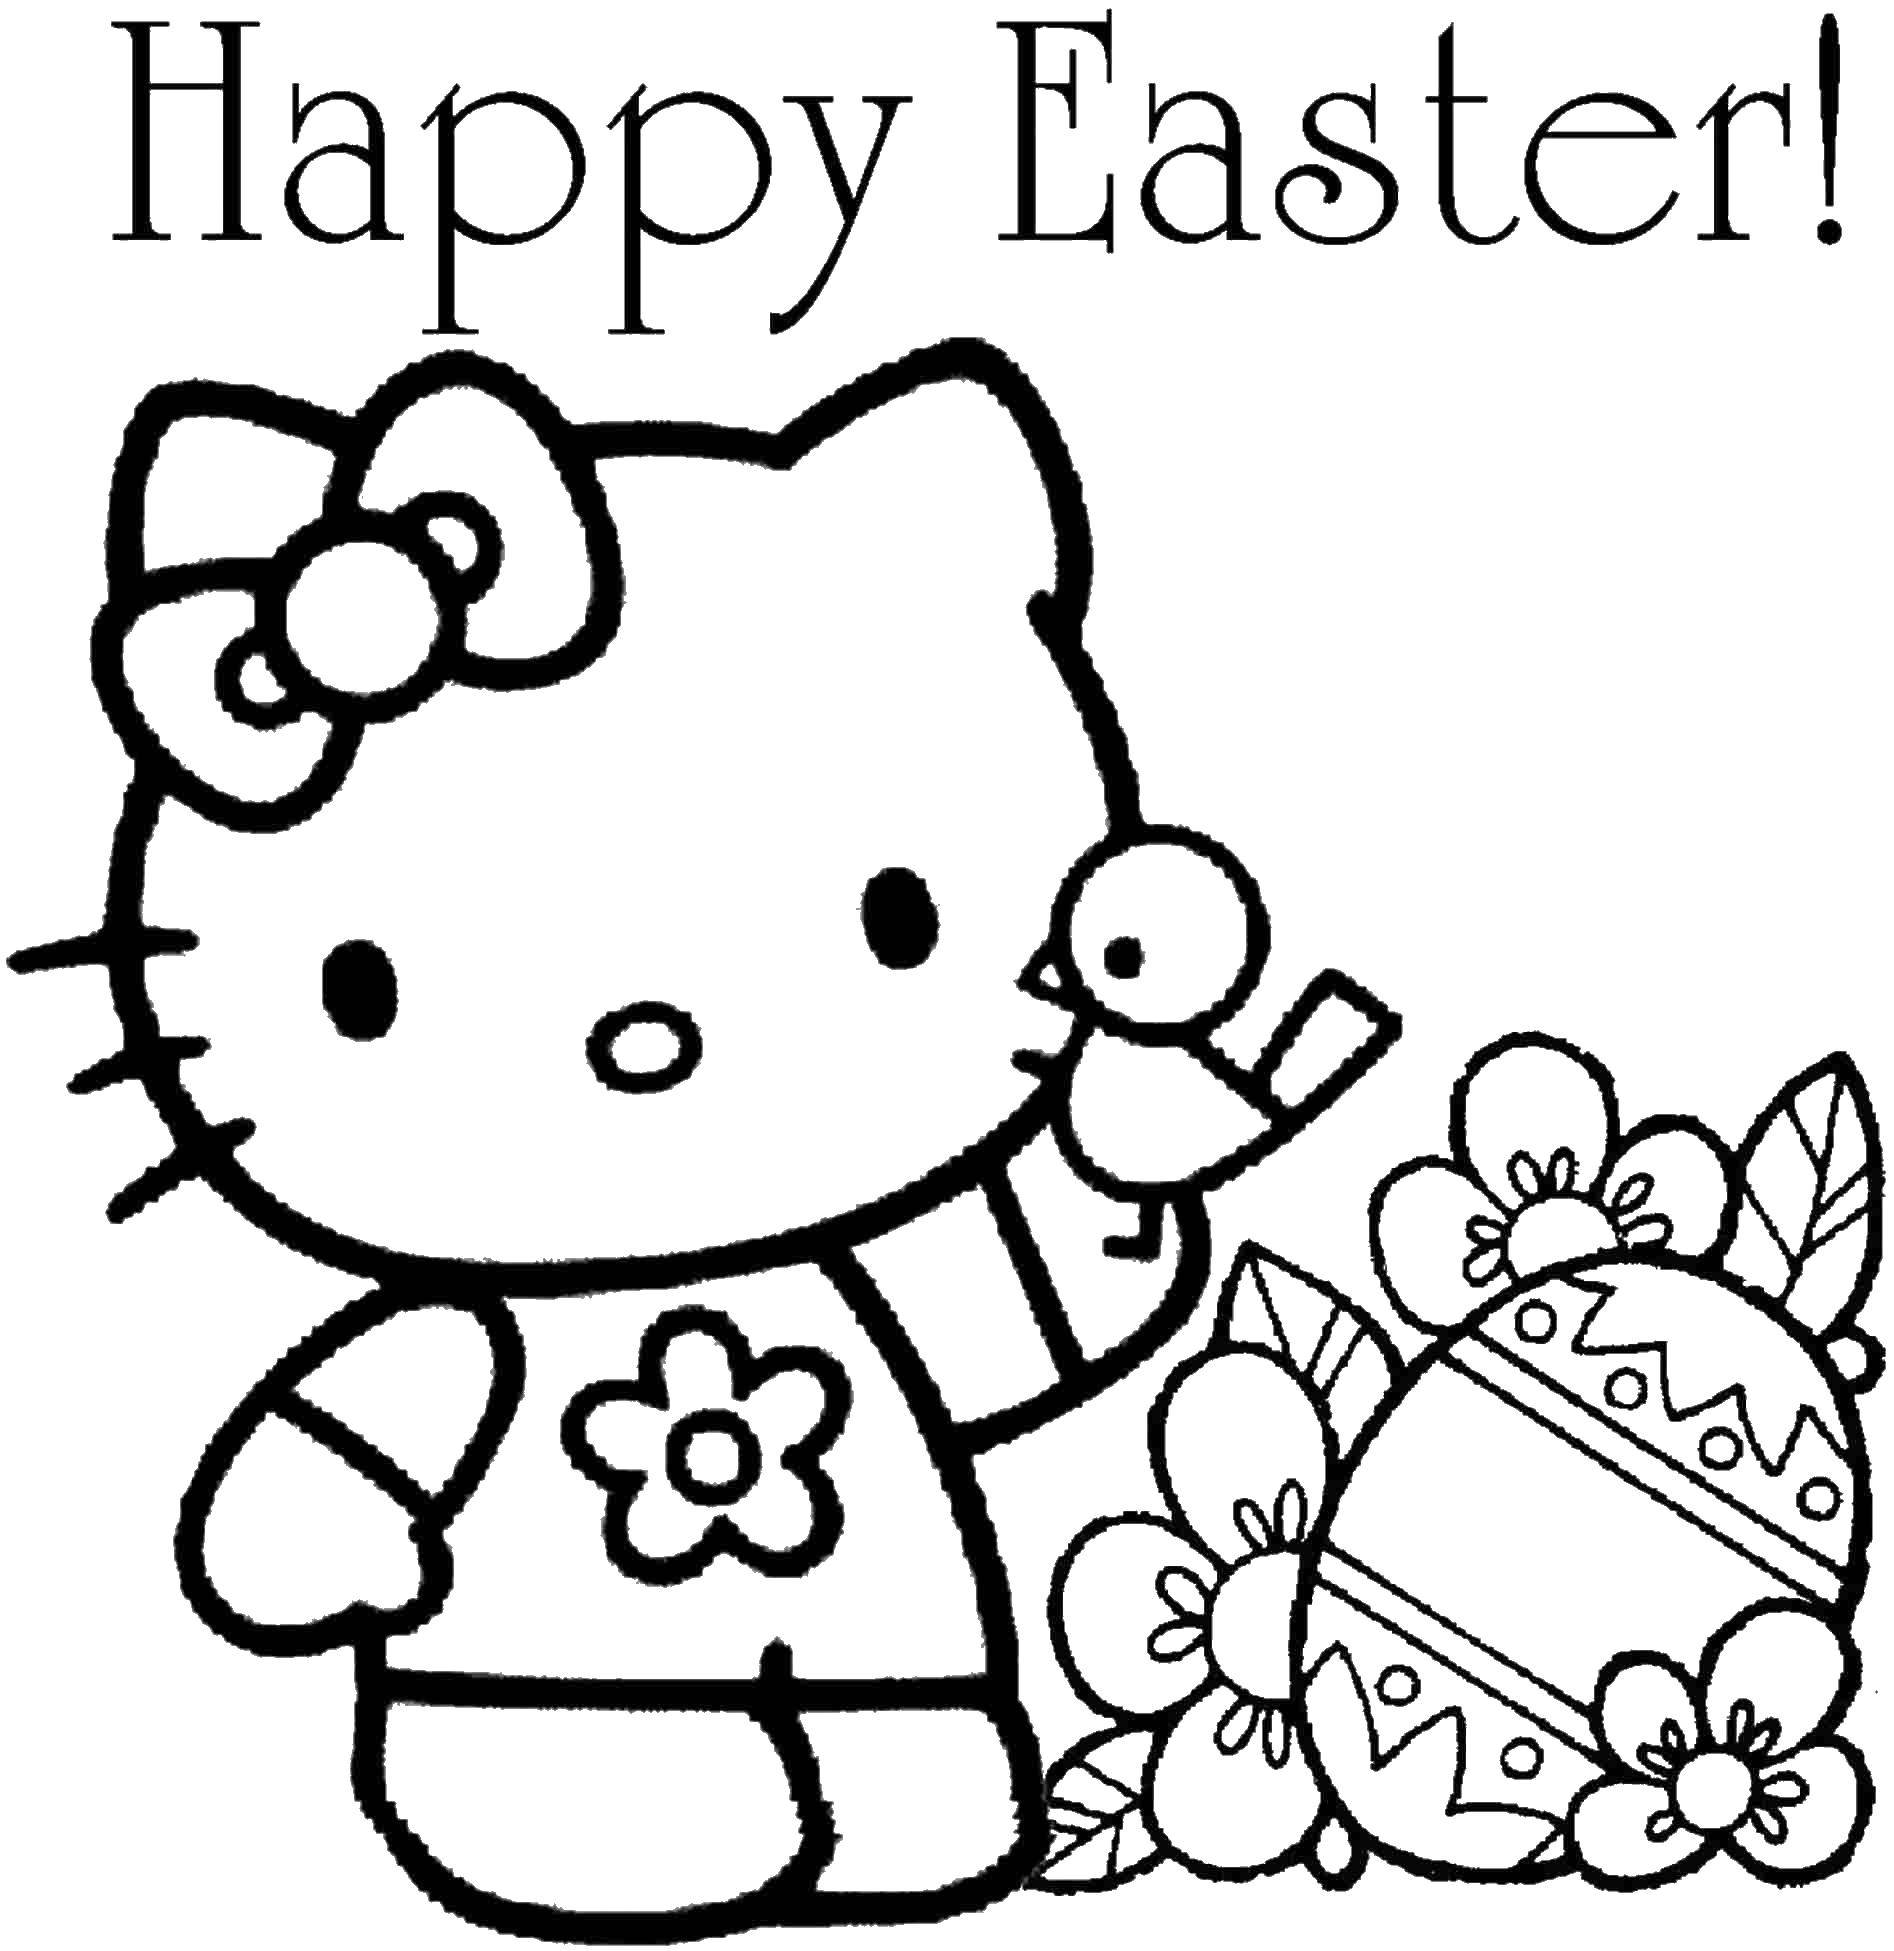 Coloring Kitty and Easter. Category kitty . Tags:  egg.